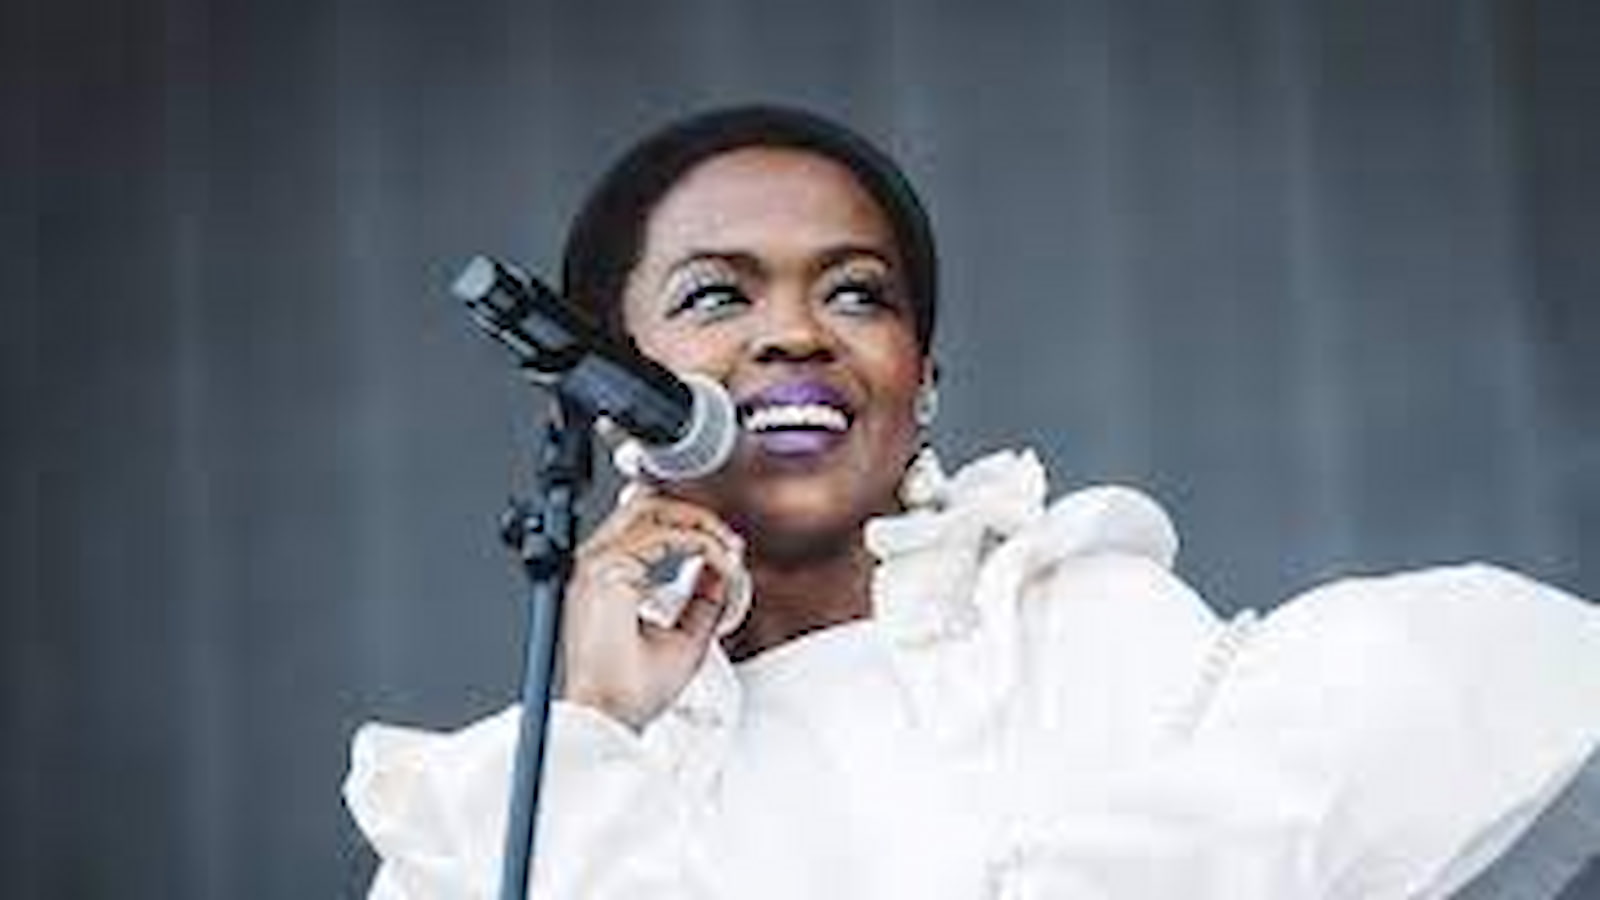 Lauryn Hill 2023 Tour: How to Get Tickets? Check Here